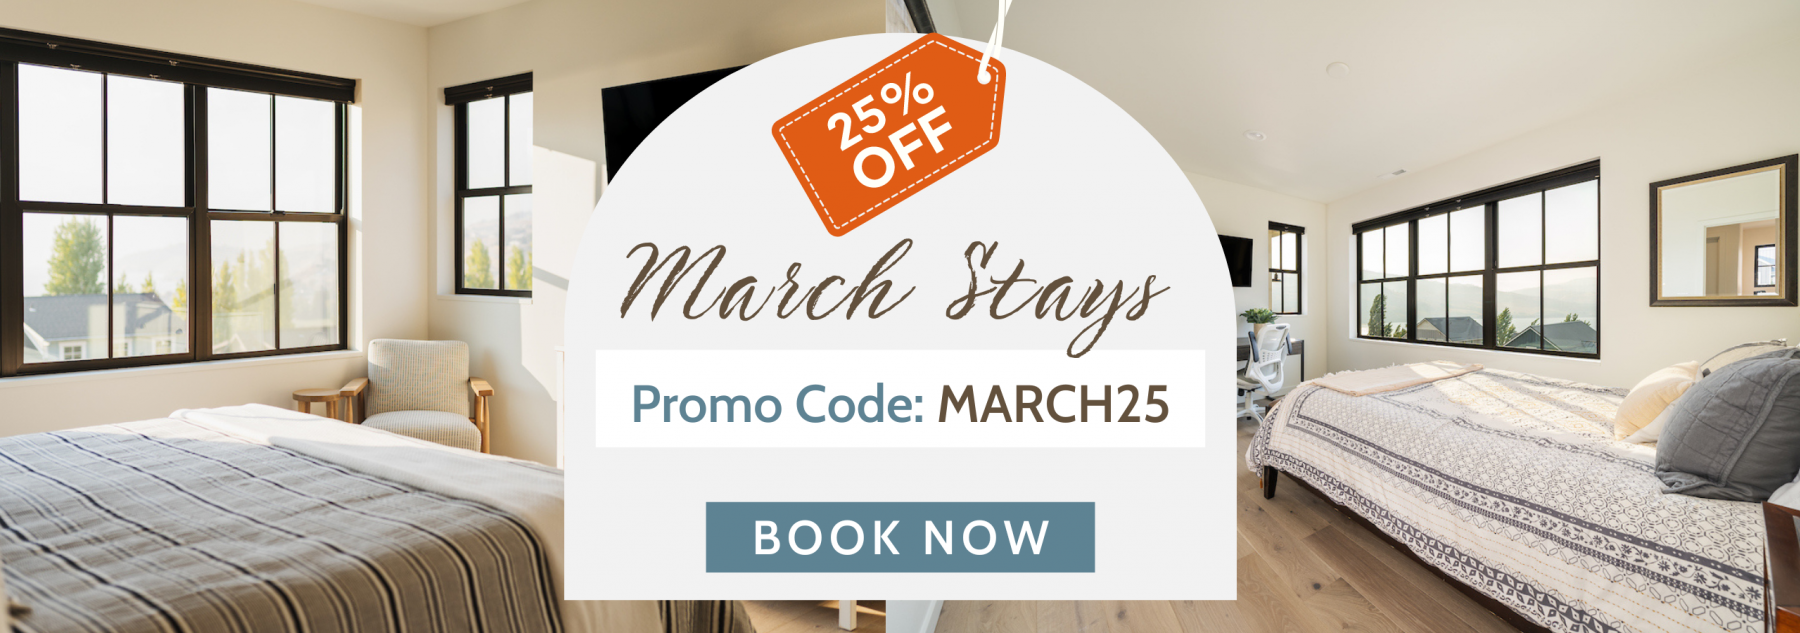 25% OFF March Stays